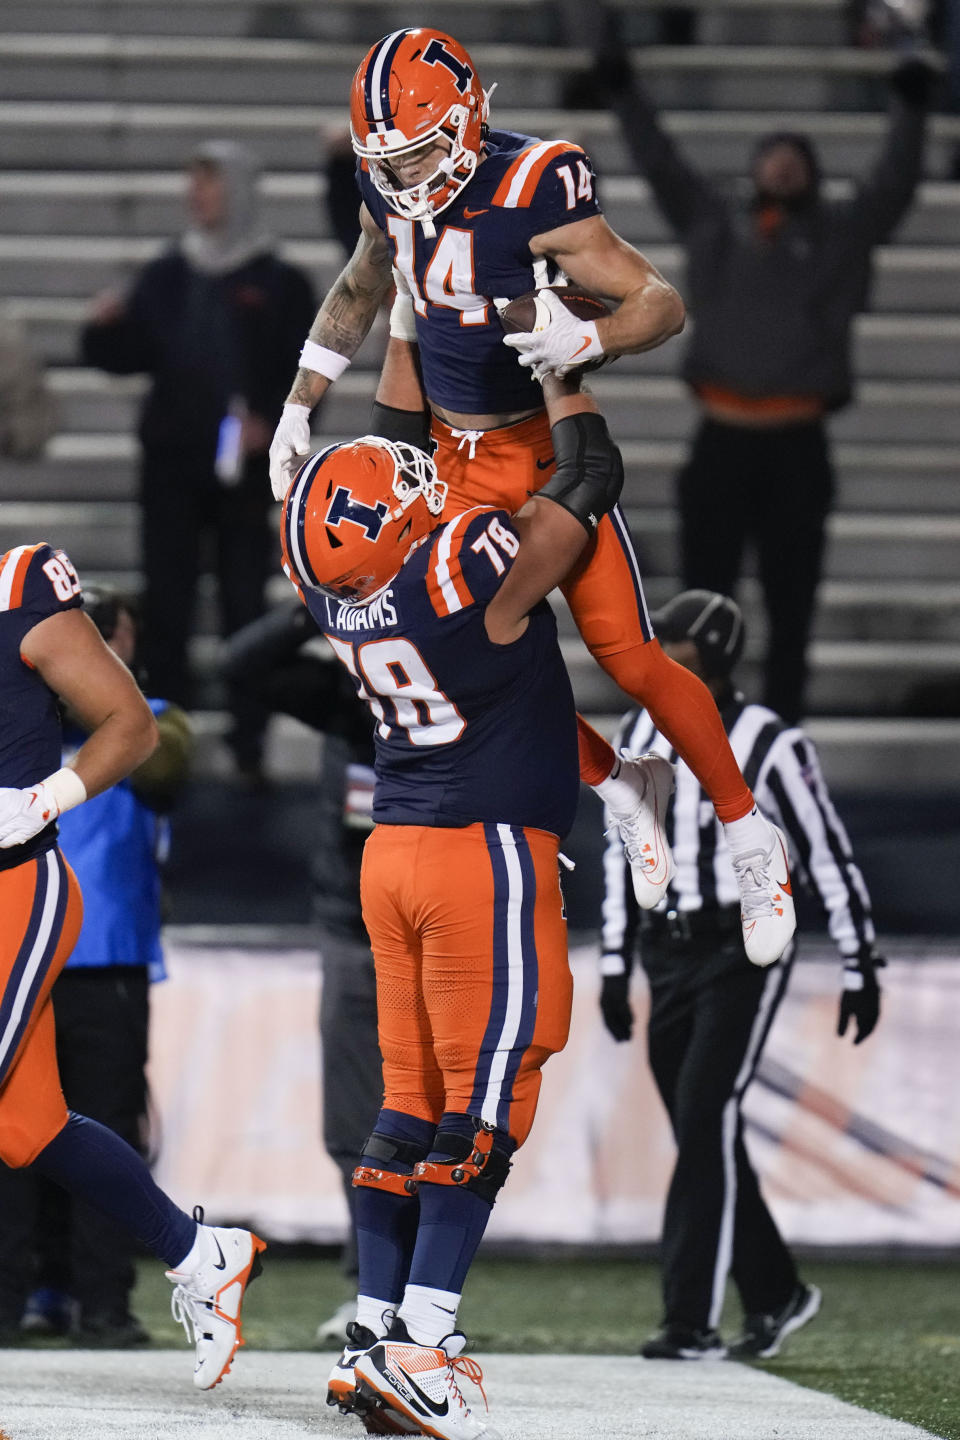 Illinois offensive lineman Isaiah Adams (78) hoists wide receiver Casey Washington (14) after Washington scored a touchdown during the second half of an NCAA college football game against Northwestern, Saturday, Nov. 25, 2023, in Champaign, Ill. (AP Photo/Erin Hooley)